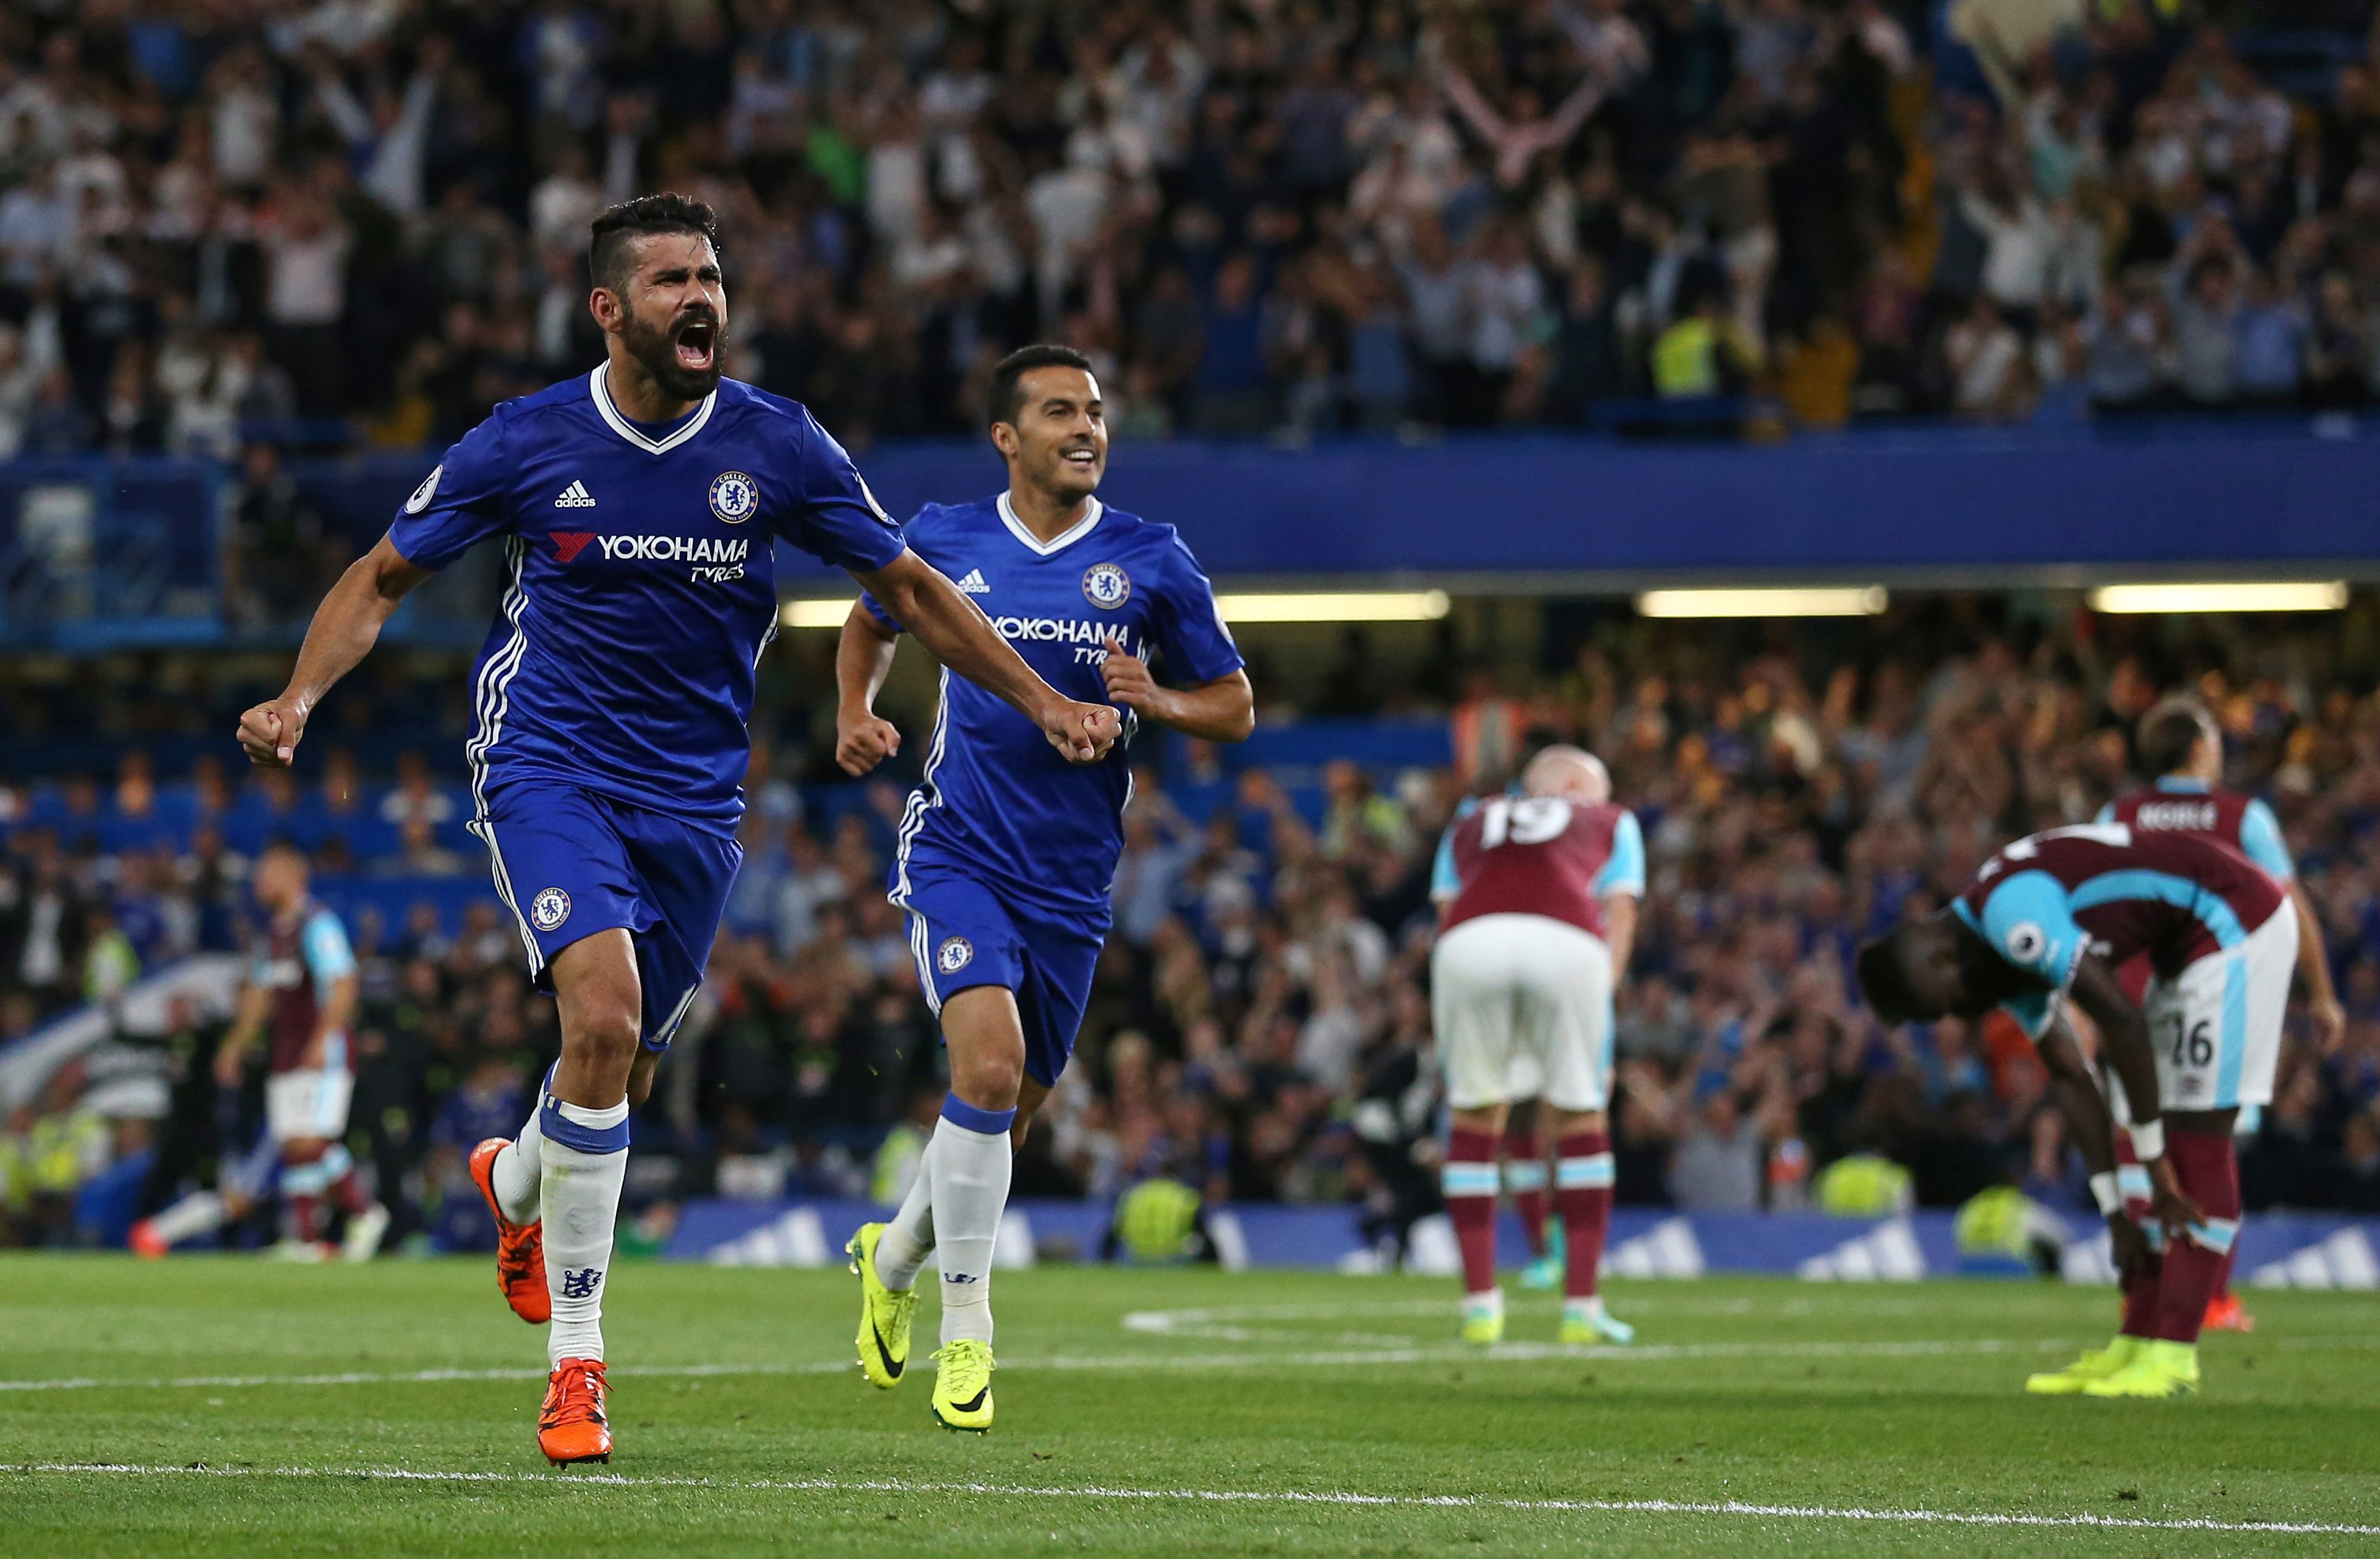 Chelsea's Brazilian-born Spanish striker Diego Costa (L) celebrates after scoring their second goal during the English Premier League football match between Chelsea and West Ham United at Stamford Bridge in London on August 15, 2016. / AFP / Justin TALLIS / RESTRICTED TO EDITORIAL USE. No use with unauthorized audio, video, data, fixture lists, club/league logos or 'live' services. Online in-match use limited to 75 images, no video emulation. No use in betting, games or single club/league/player publications.  /         (Photo credit should read JUSTIN TALLIS/AFP/Getty Images)